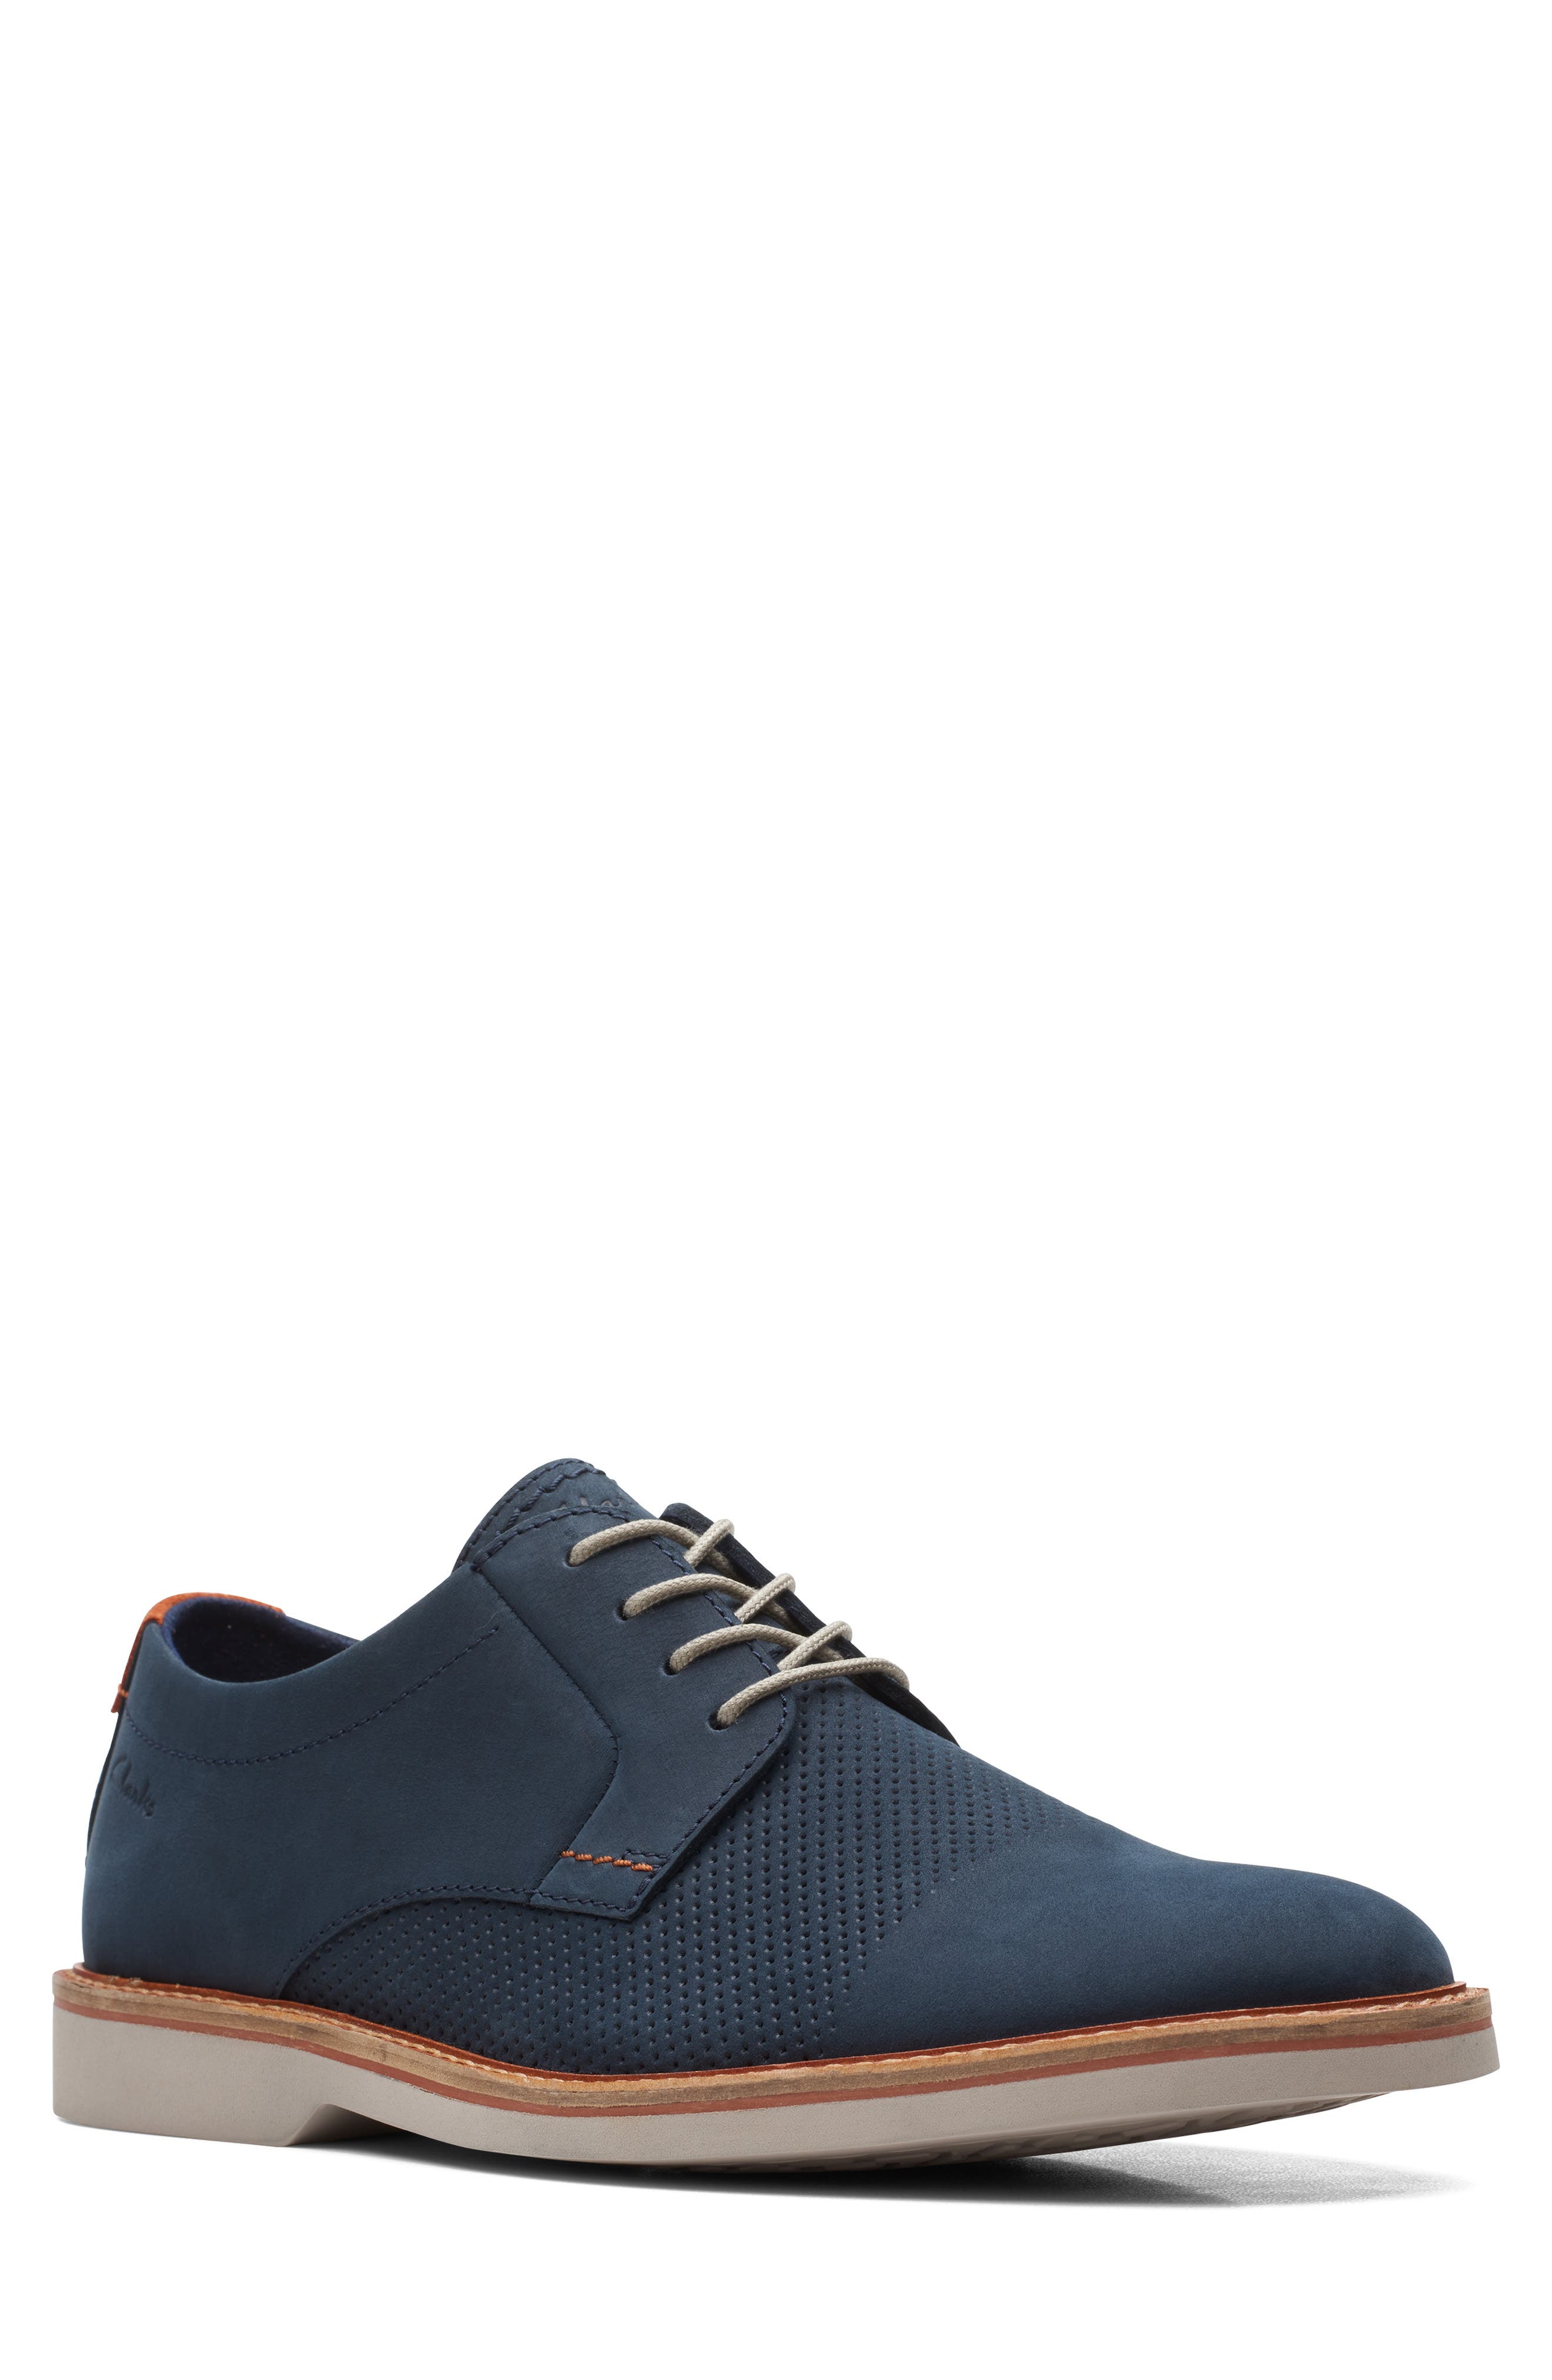 Mens Clarks Formal Shoes 'Aze Night' 